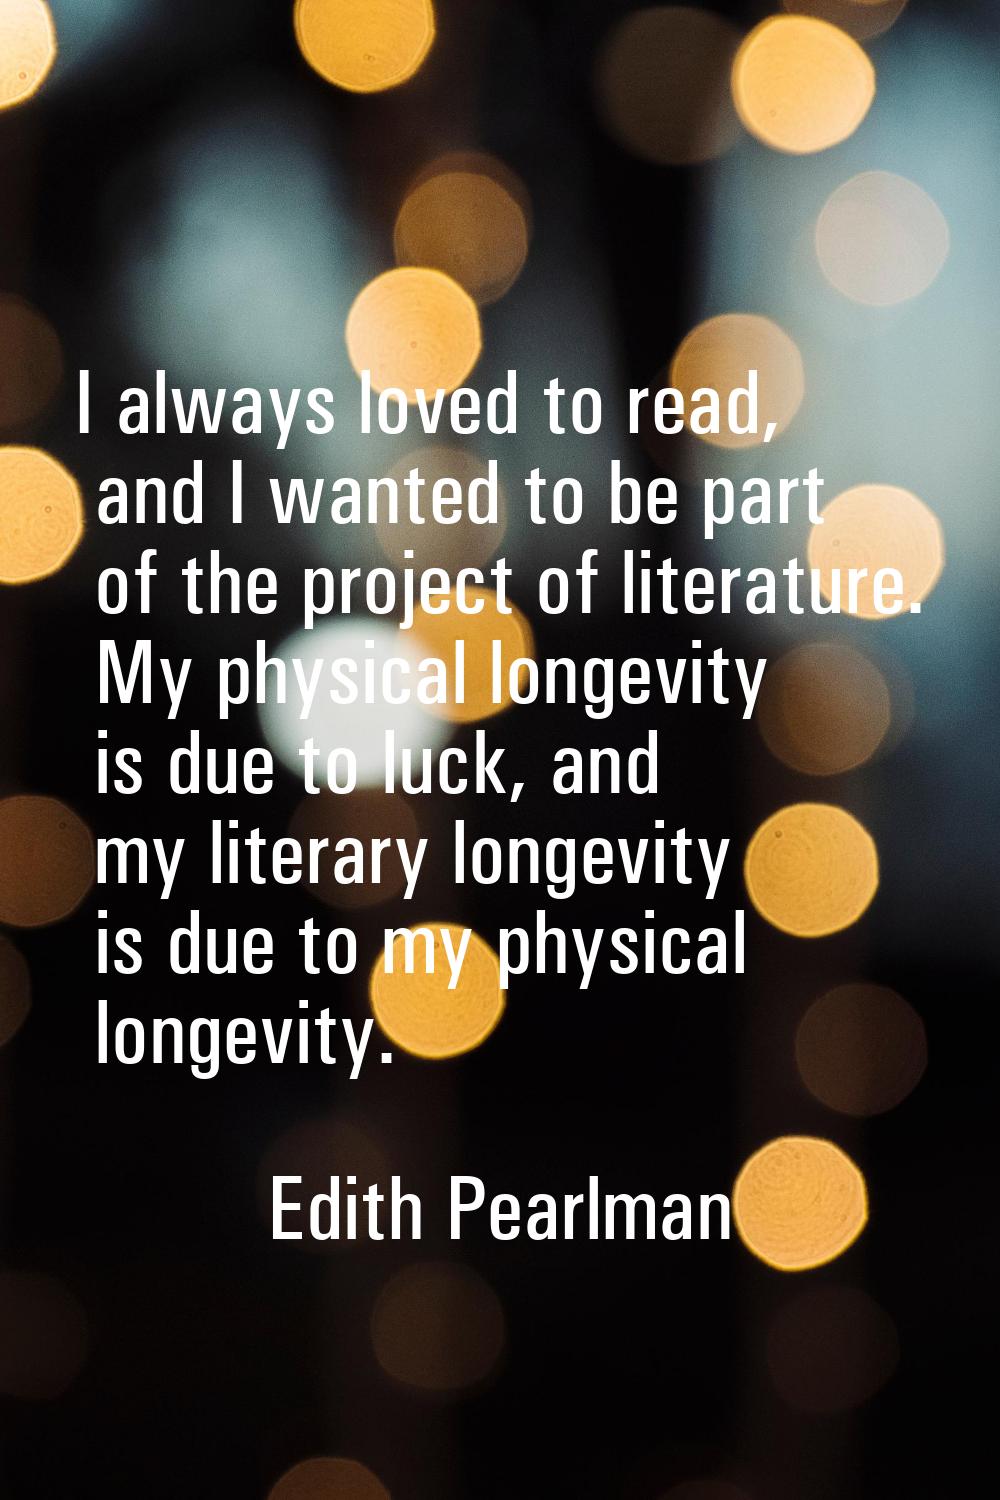 I always loved to read, and I wanted to be part of the project of literature. My physical longevity